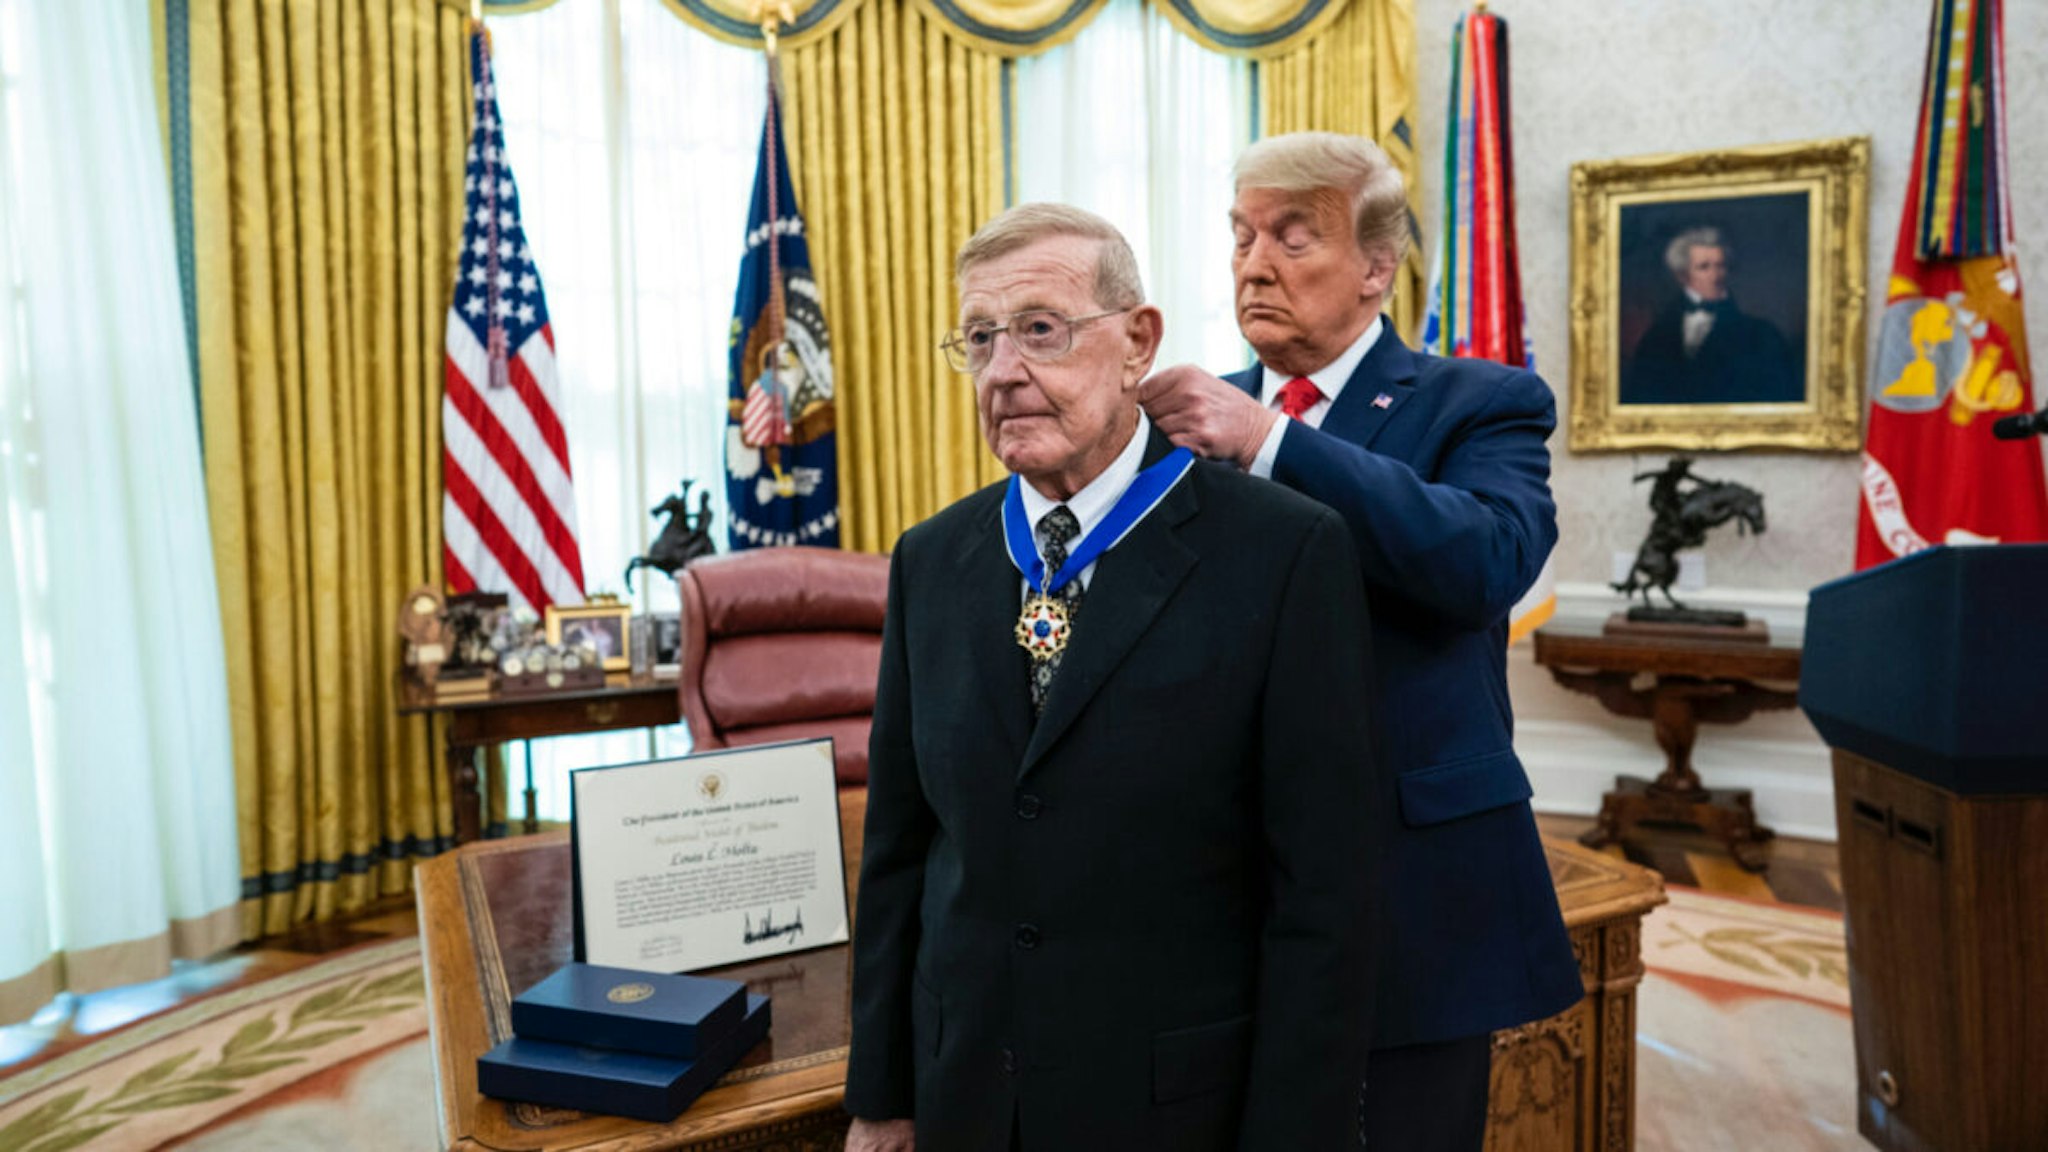 President Donald Trump presents the Medal of Freedom to former college football coach Lou Holtz in the Oval Office of the White House on December 3, 2020 in Washington, DC.